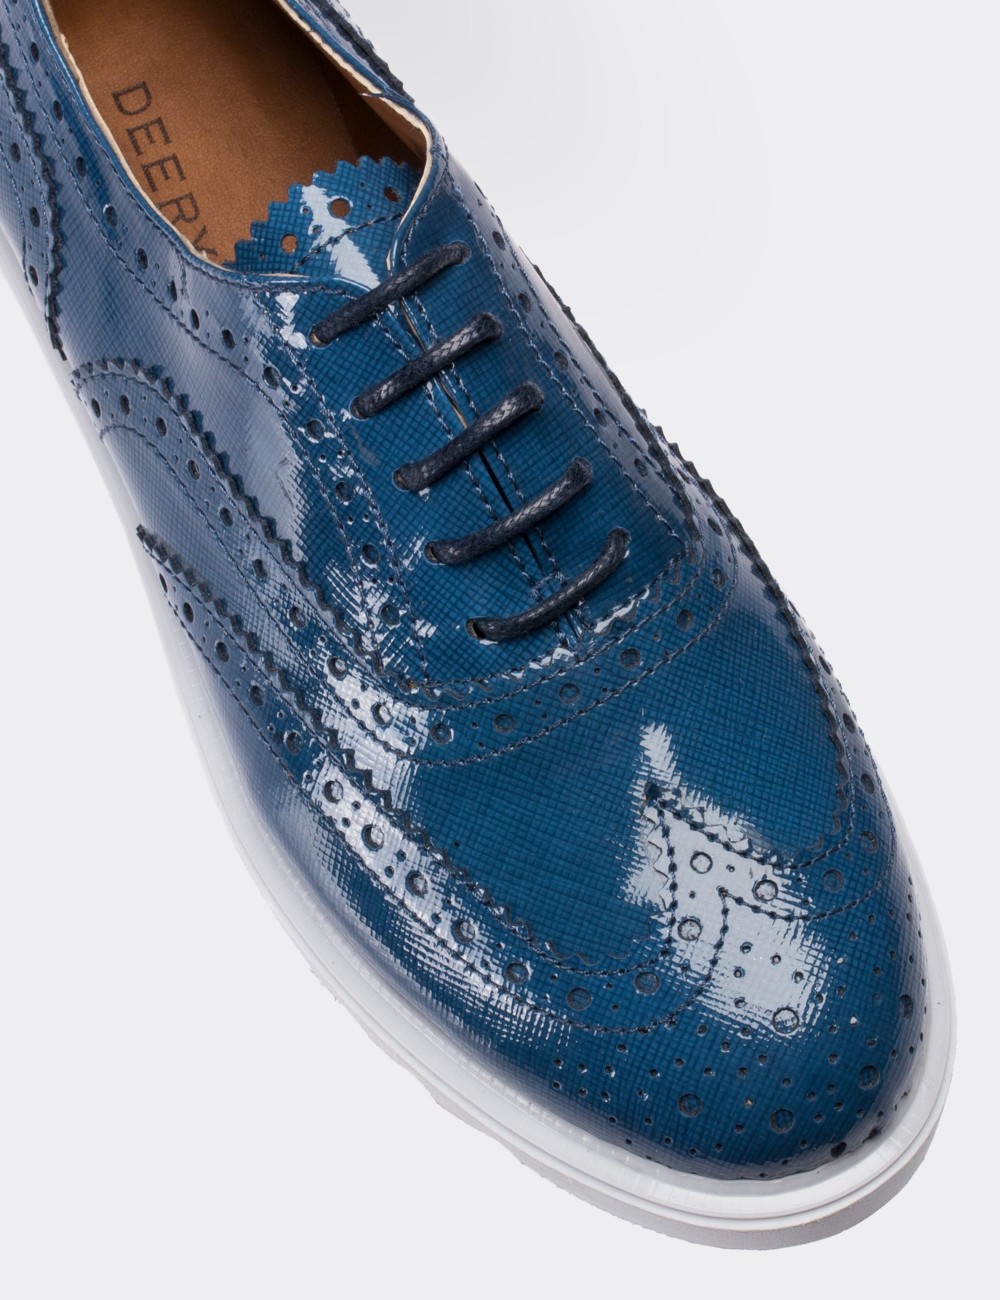 Blue Patent Leather Lace-up Shoes - 01418ZMVIP02